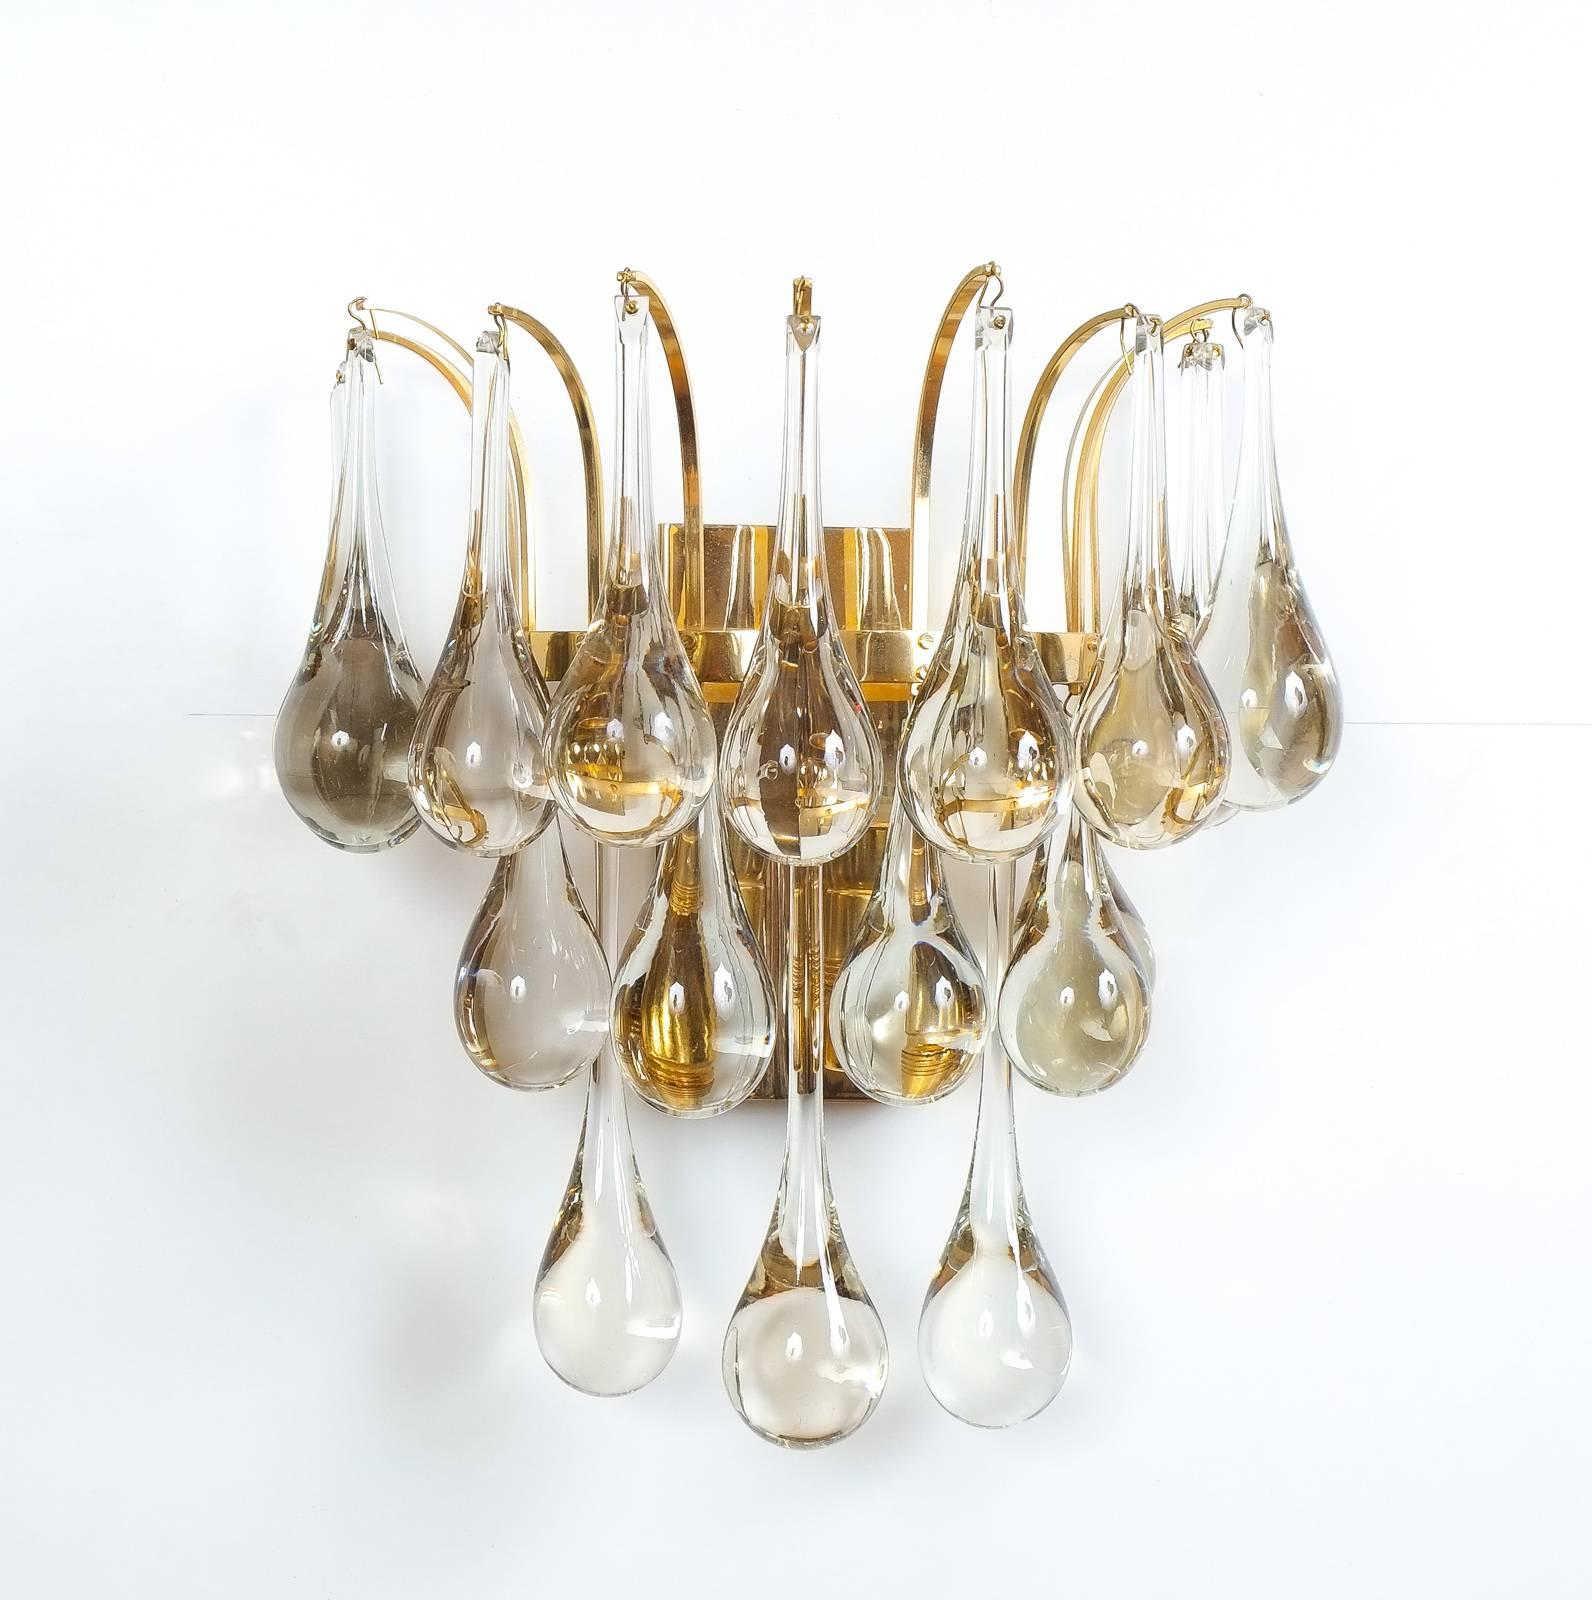 Set of 4 wall lamps in brass with solid tear drop glass pieces- priced and sold per piece.

Beautiful multi-tiered set of four Murano glass tear drop sconces, 1960 composed of a multitude of hand blown smooth Murano glass drops hanging from a